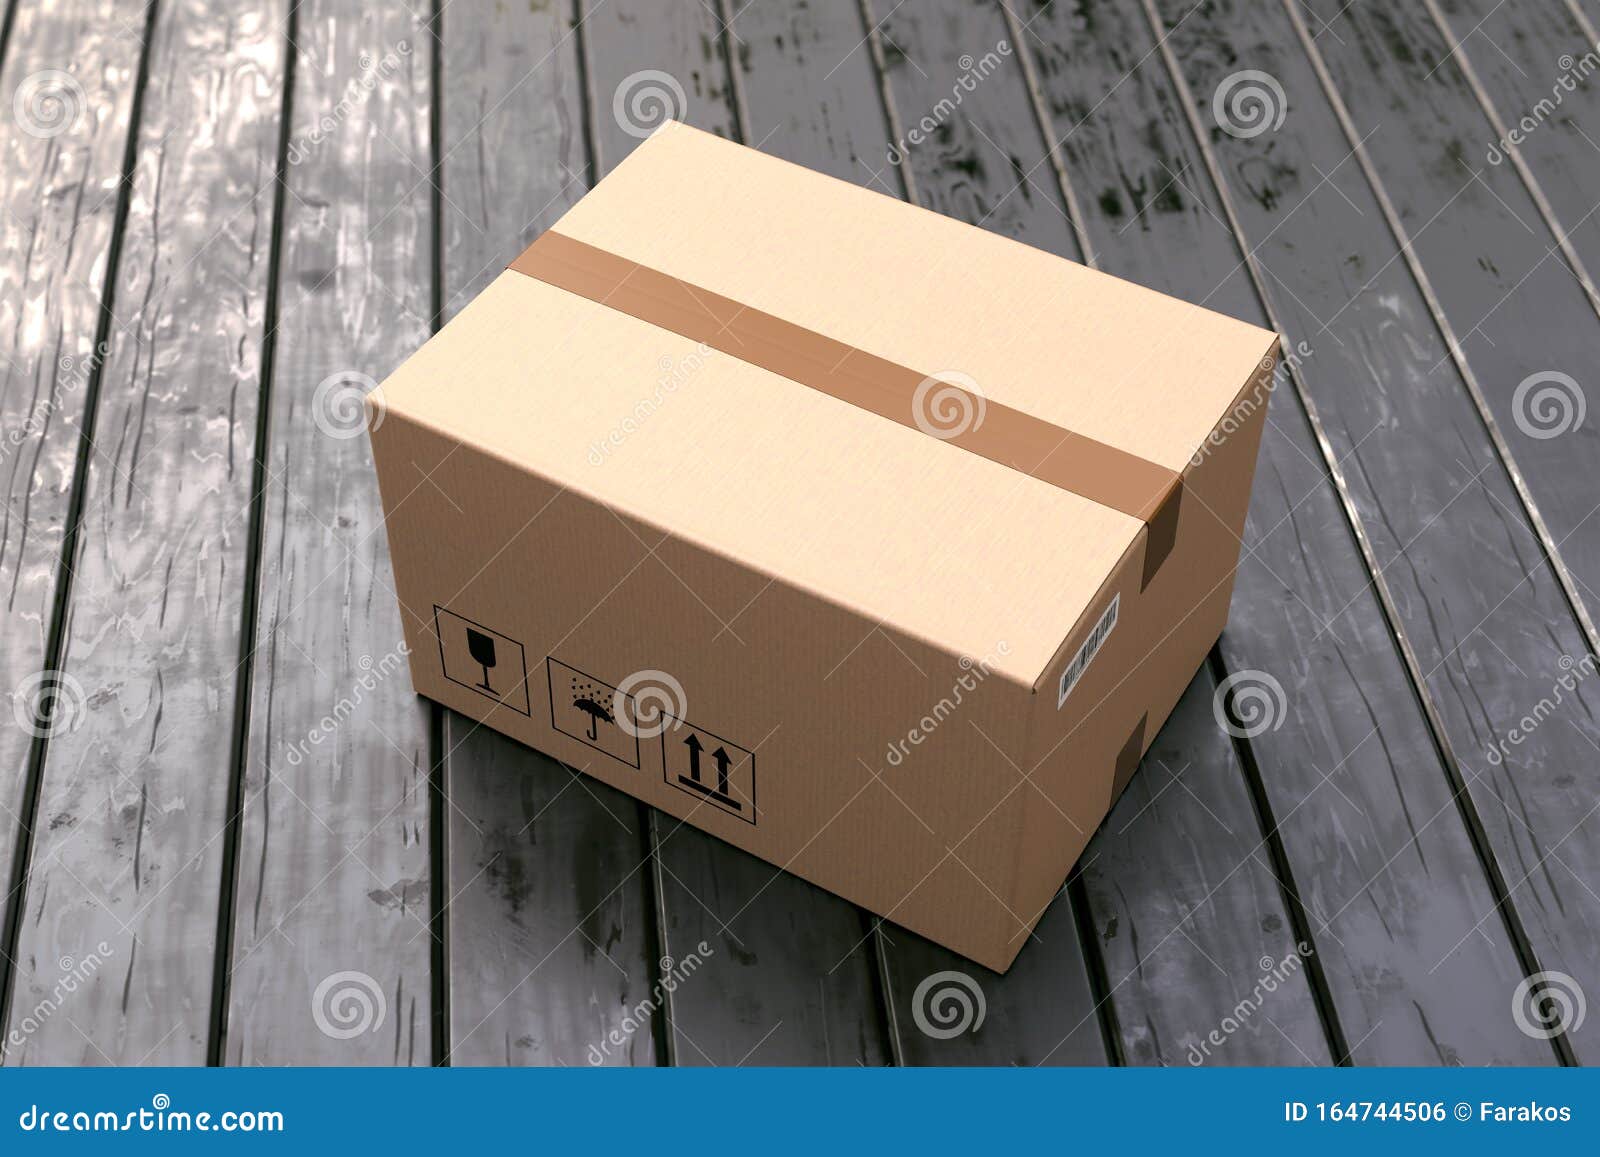 Cardboard Box On Black Wooden Porch Floor Stock Photo Image Of